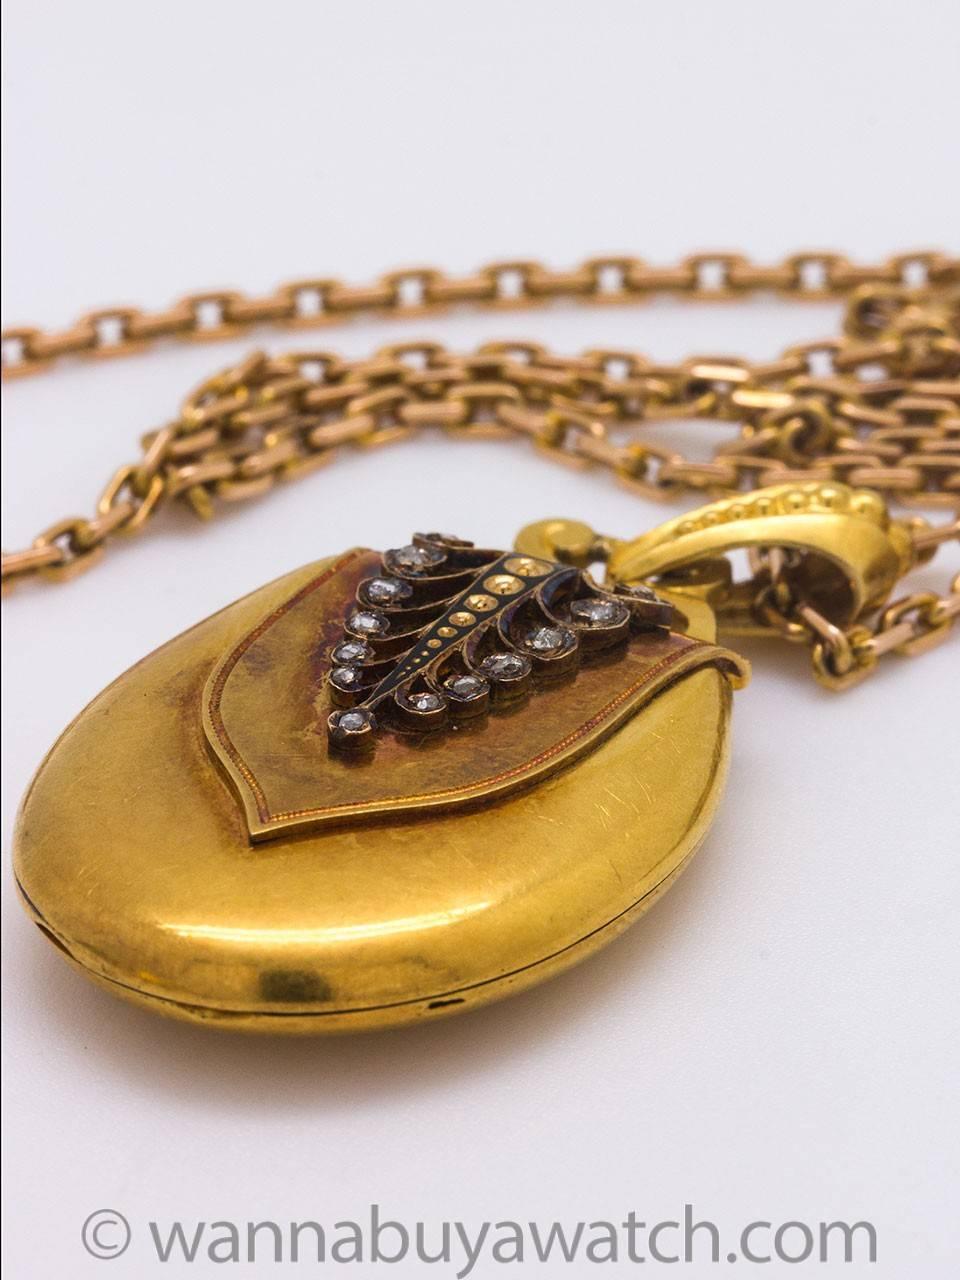 Stunning Victorian 18k yellow gold teardrop diamond locket with lovely organic swirl motif, set with 16 rose cut diamonds. Stones measure from 1-2 millimeters each, with an approximate total weight of .20ct. Locket is 25mm wide x 39mm long, 8mm